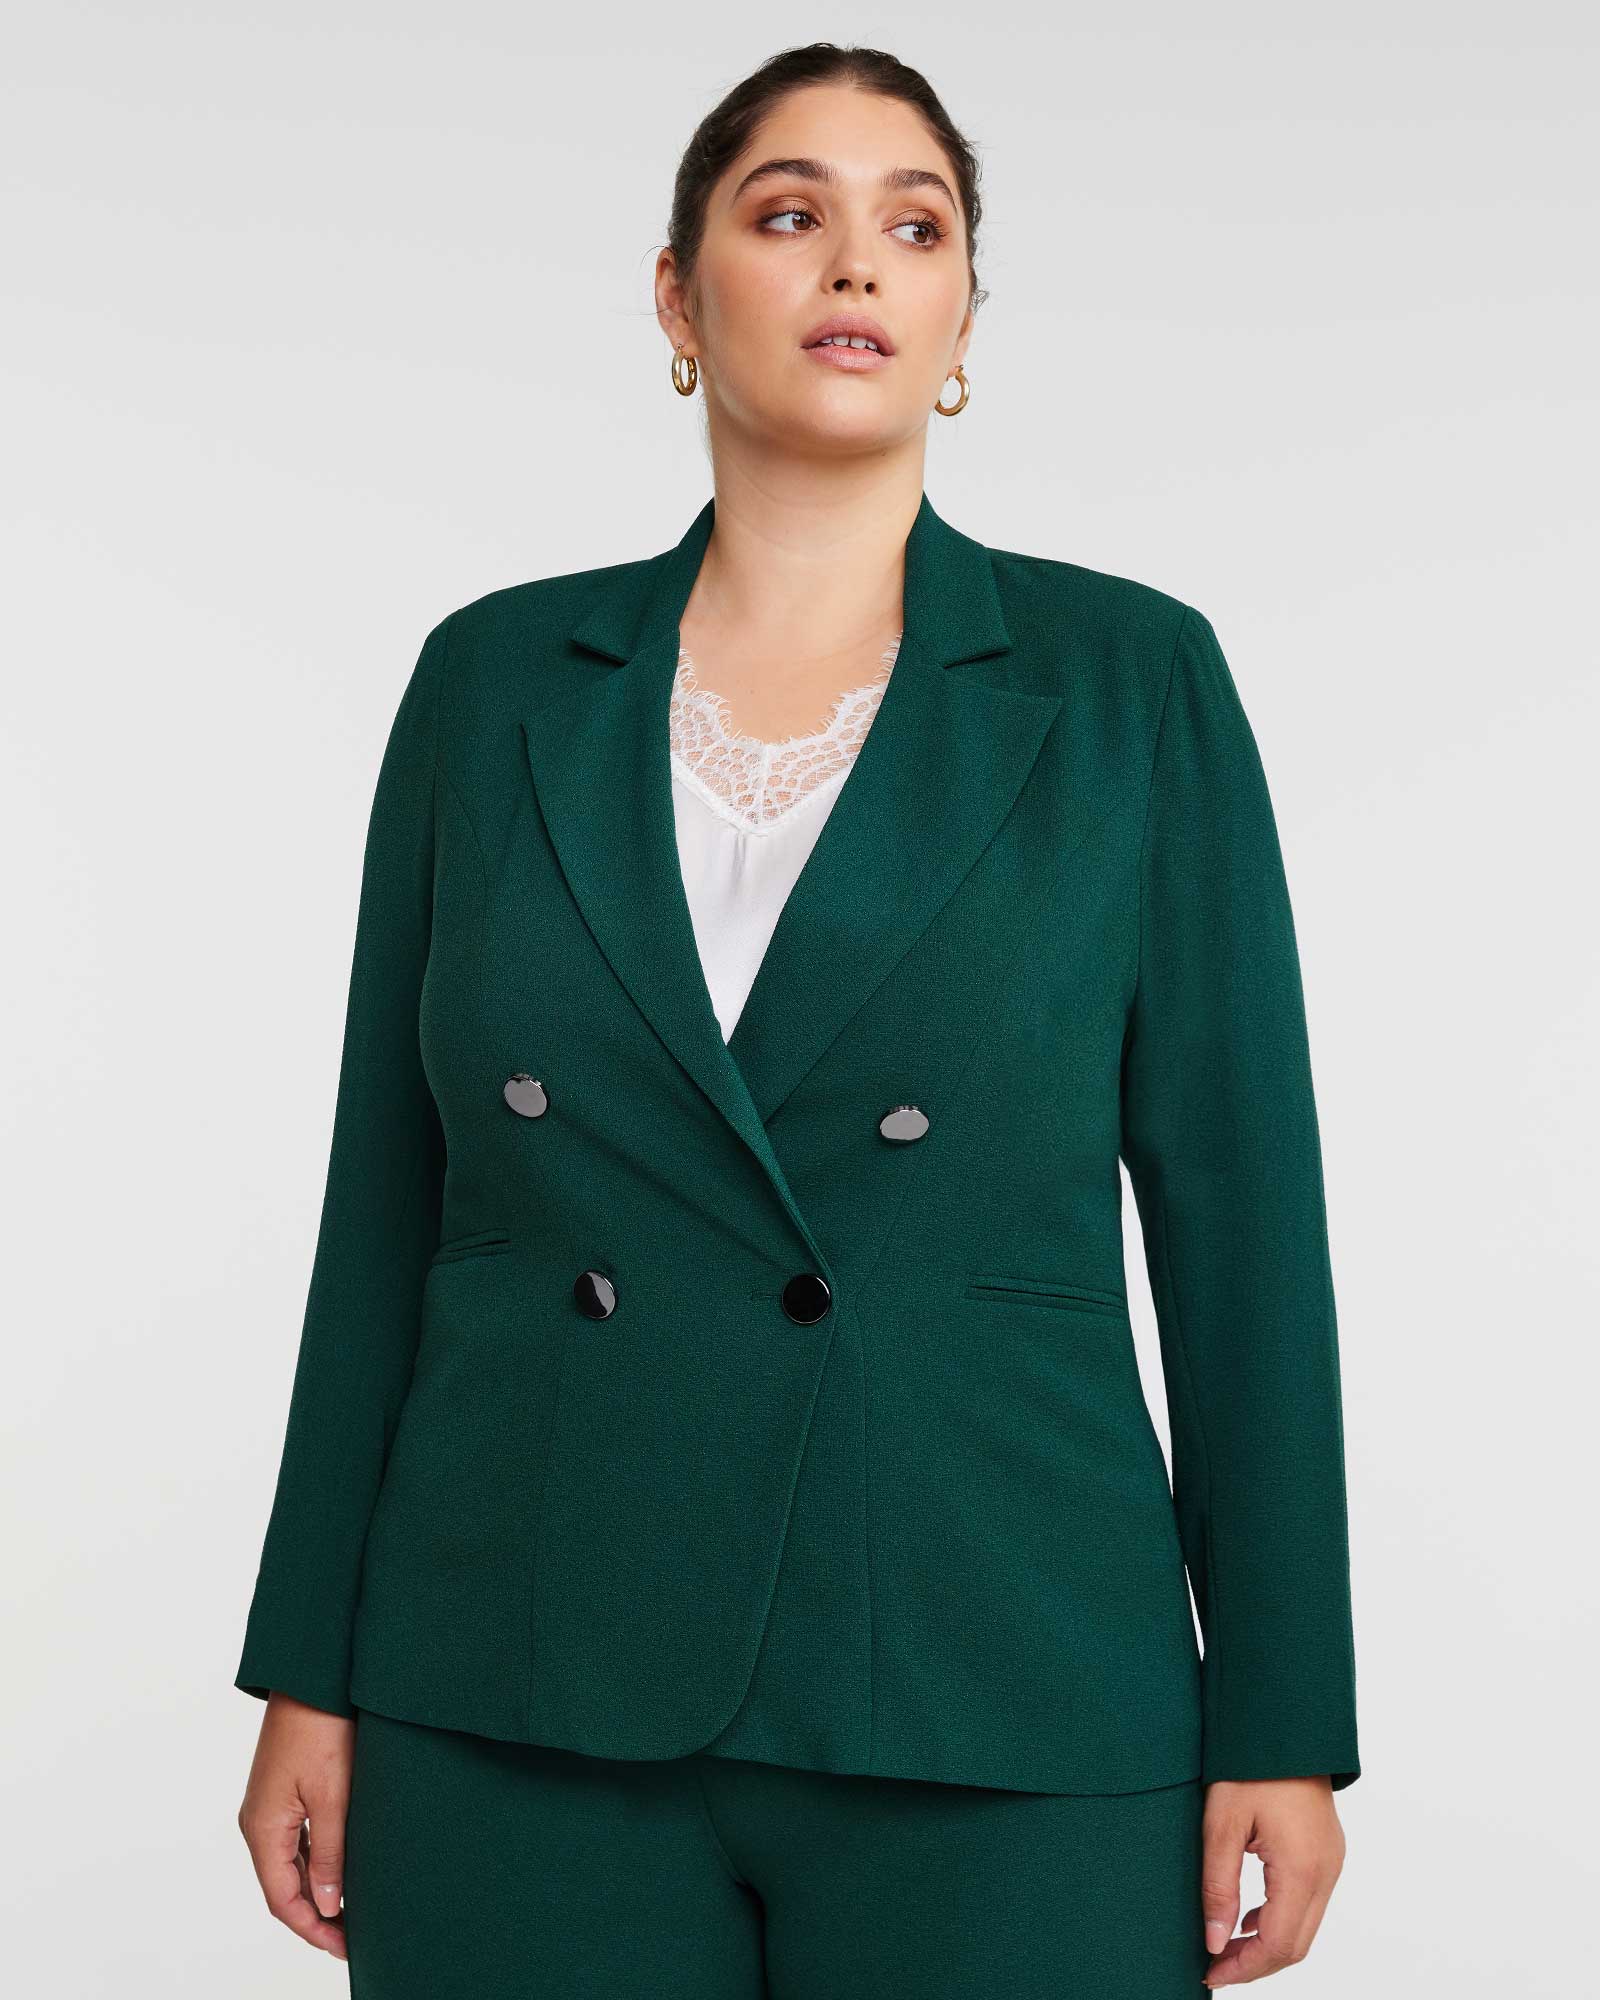 A woman wearing the Estelle Clever Blazer Jacket in Green and pants.